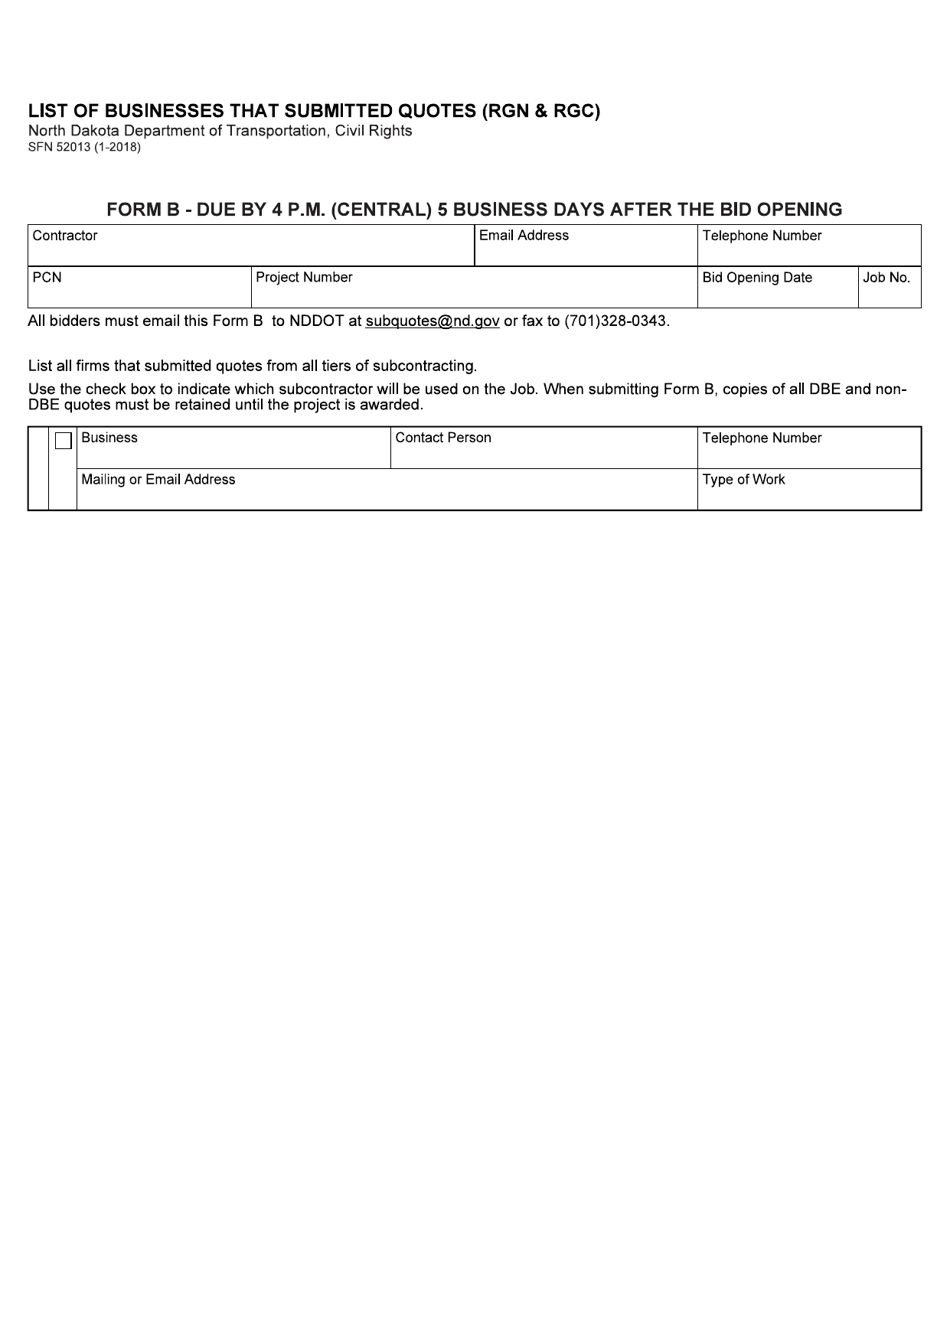 Form SFN52013 (B) List of Businesses That Submitted Quotes (Rgn  Rgc) - North Dakota, Page 1